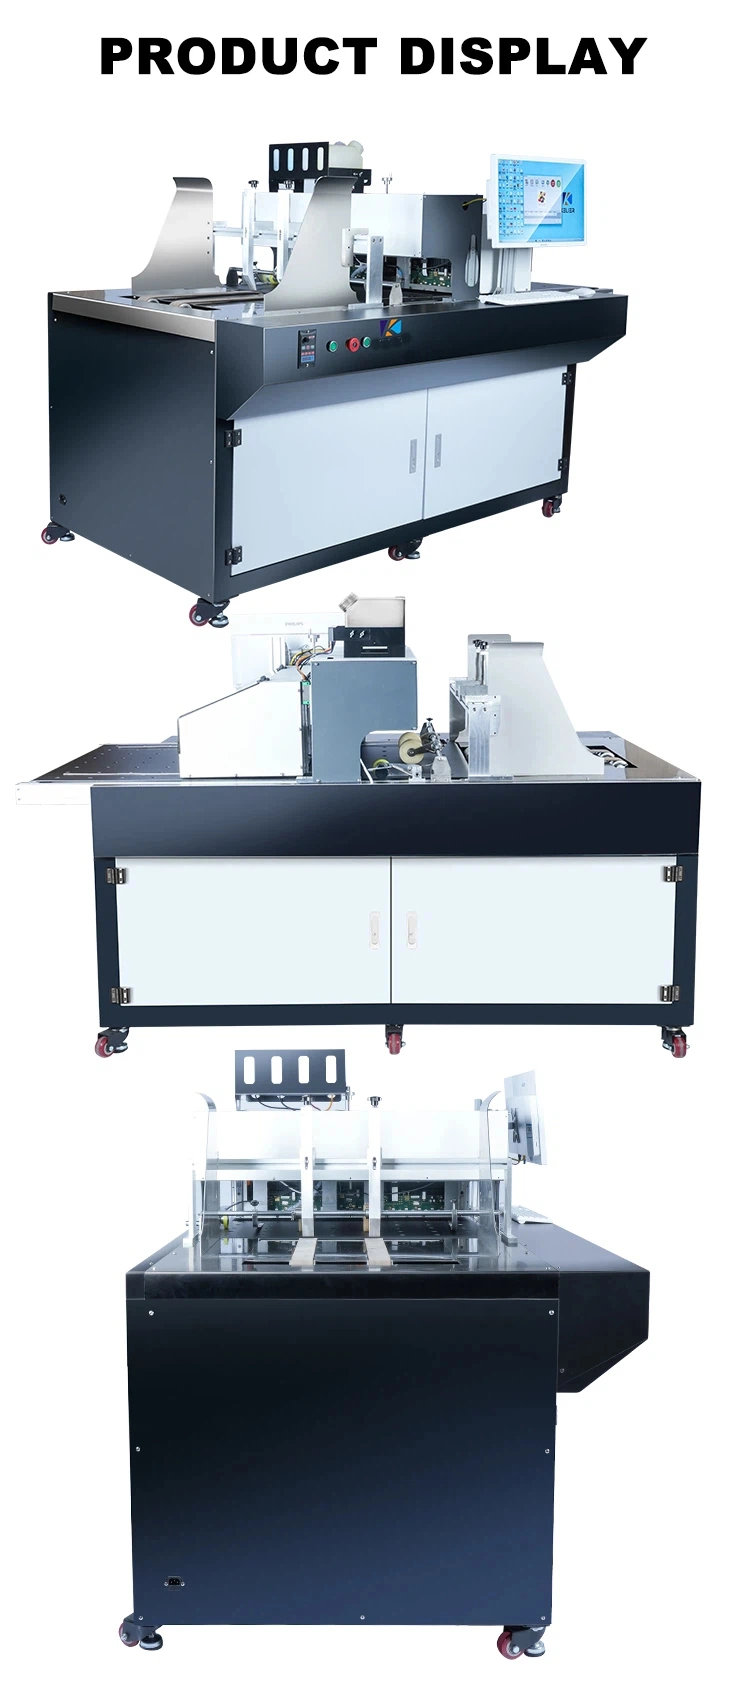 Single Pass Direct to Packaging Printer